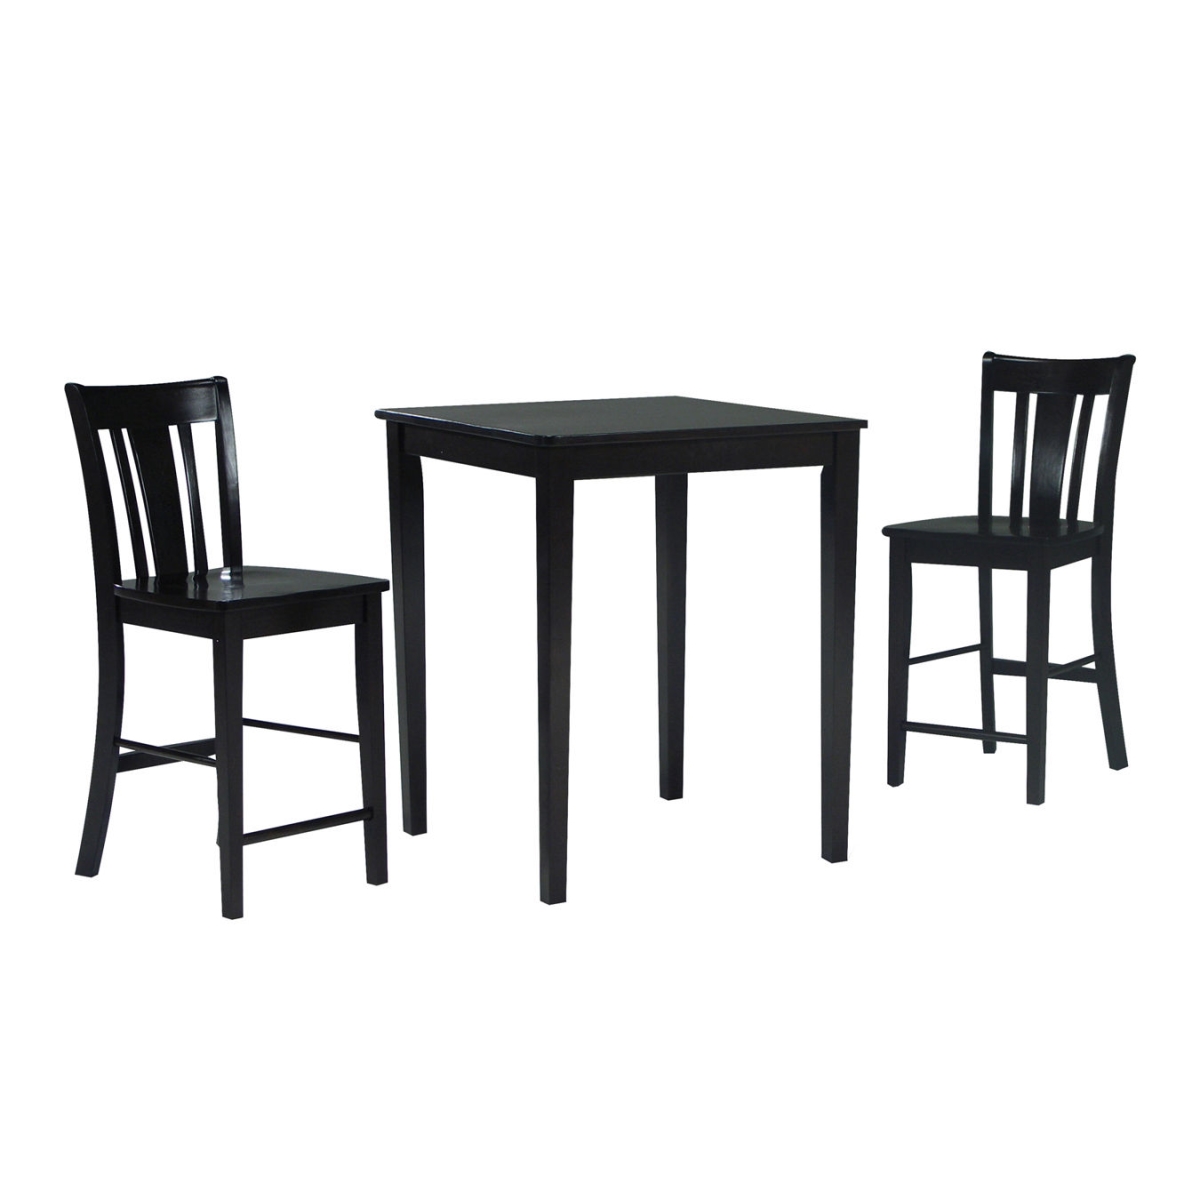 Internationalconcepts Intc262 30x30 Gathering Height Table With 2 San Remo Stools - 3 Pieces, Rich Mocha